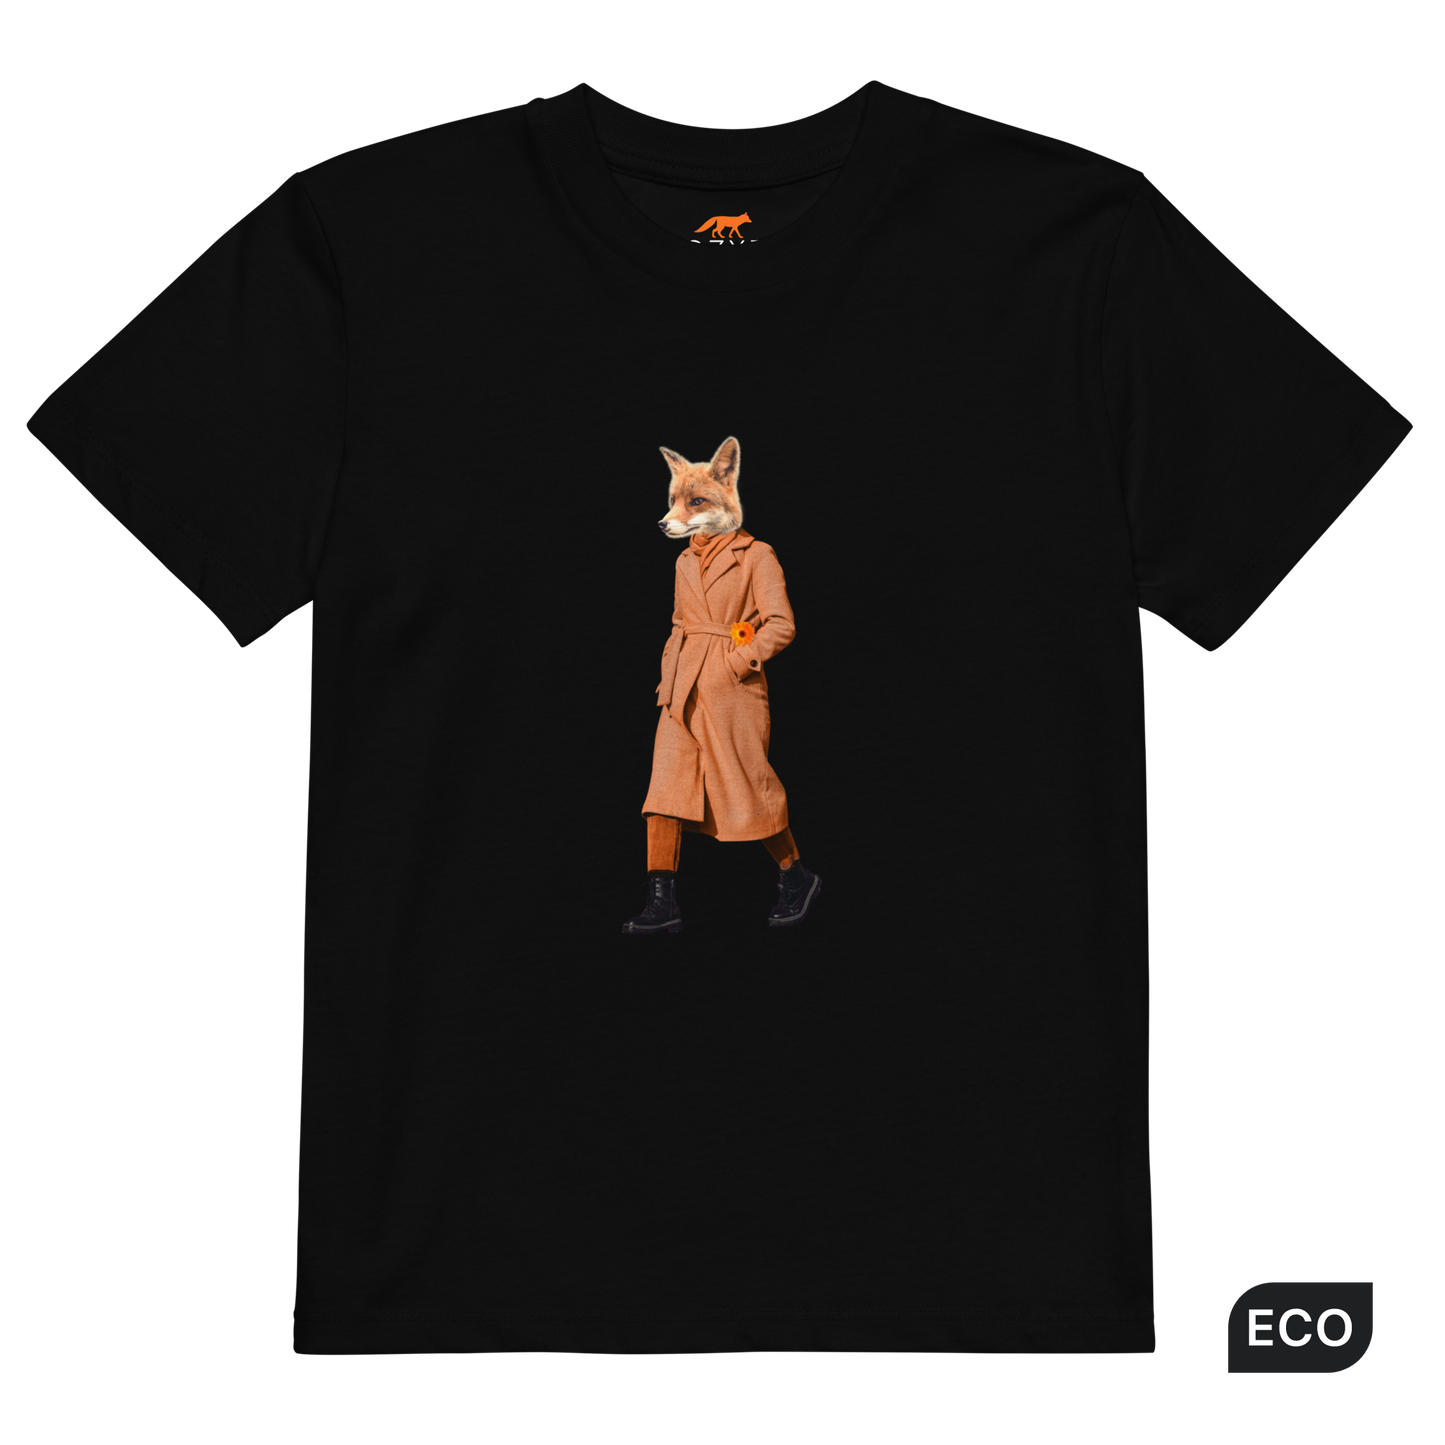 Black Anthropomorphic Fox Organic Cotton Kids T-Shirt featuring an Anthropomorphic Fox In a Trench Coat graphic on the chest - Kids' Graphic Tees - Funny Animal T-Shirts - Boozy Fox